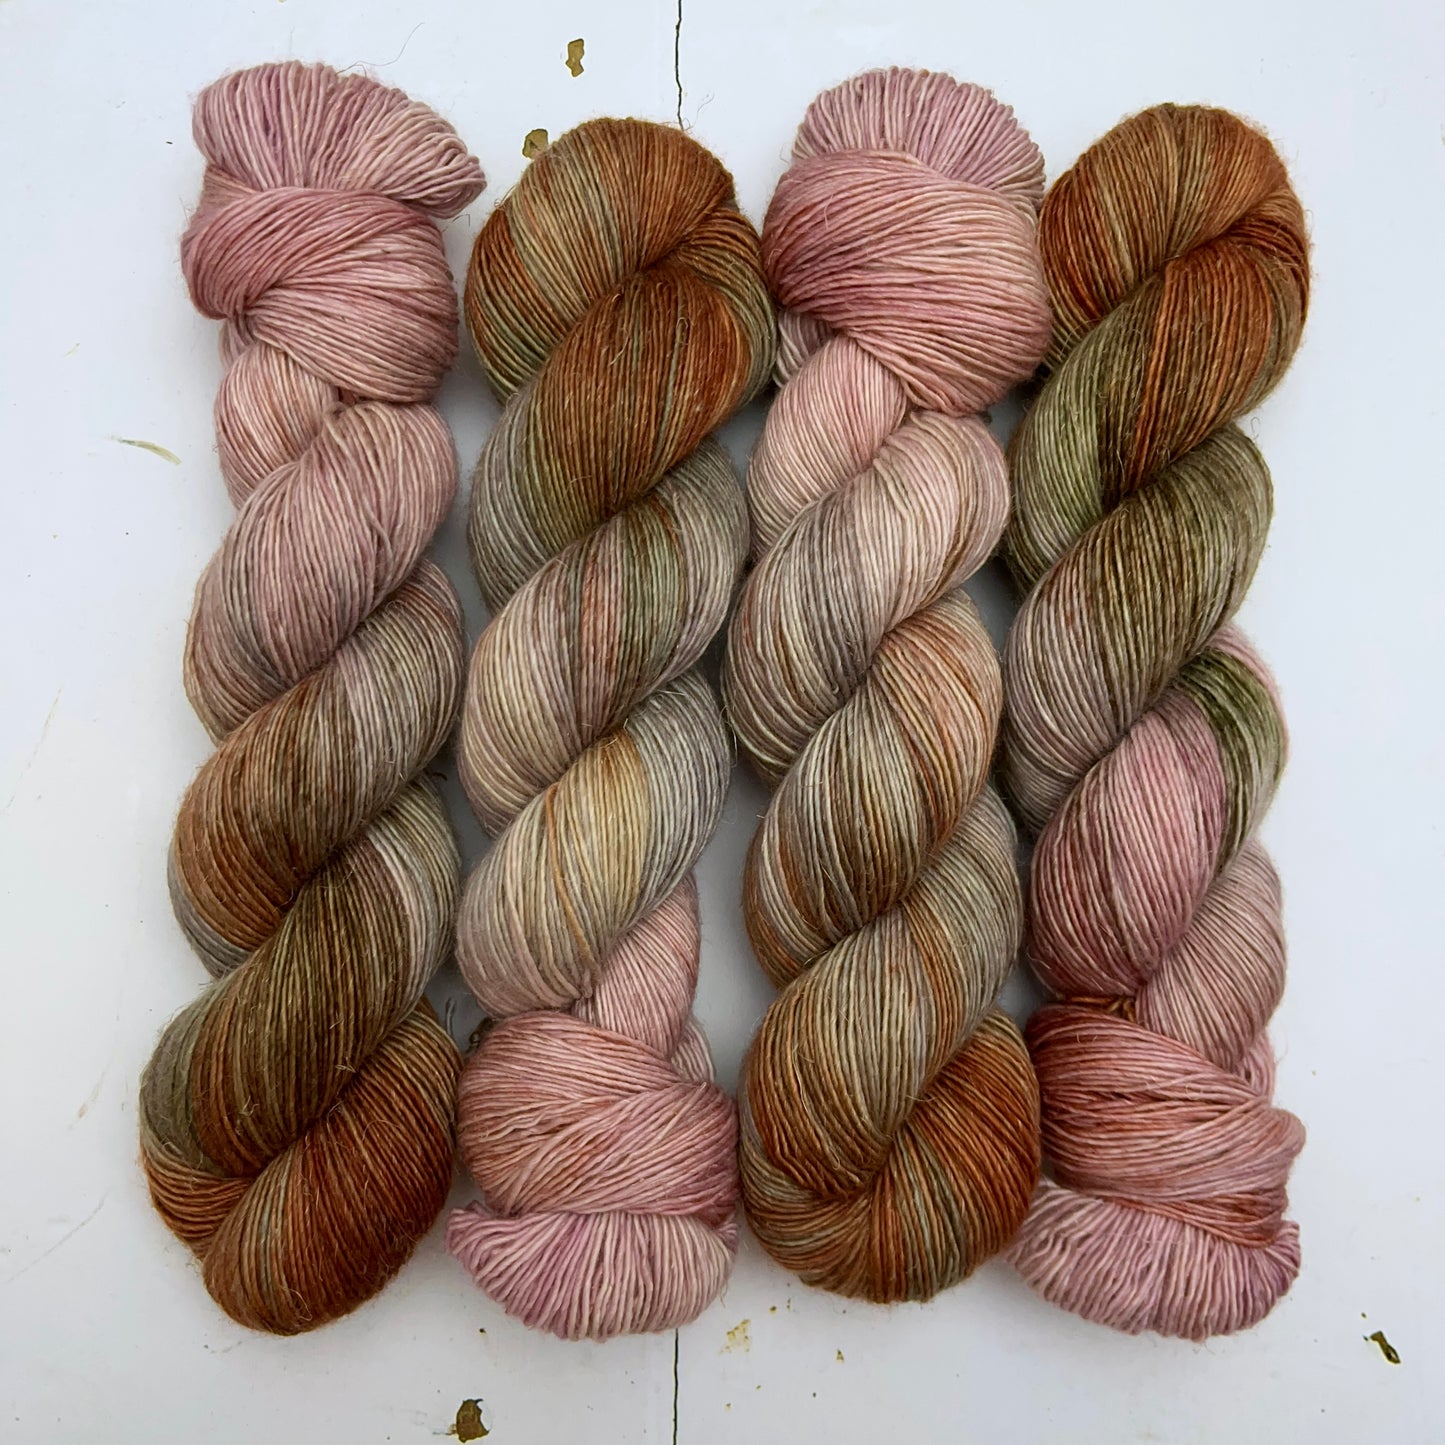 yarn from the meadow - april